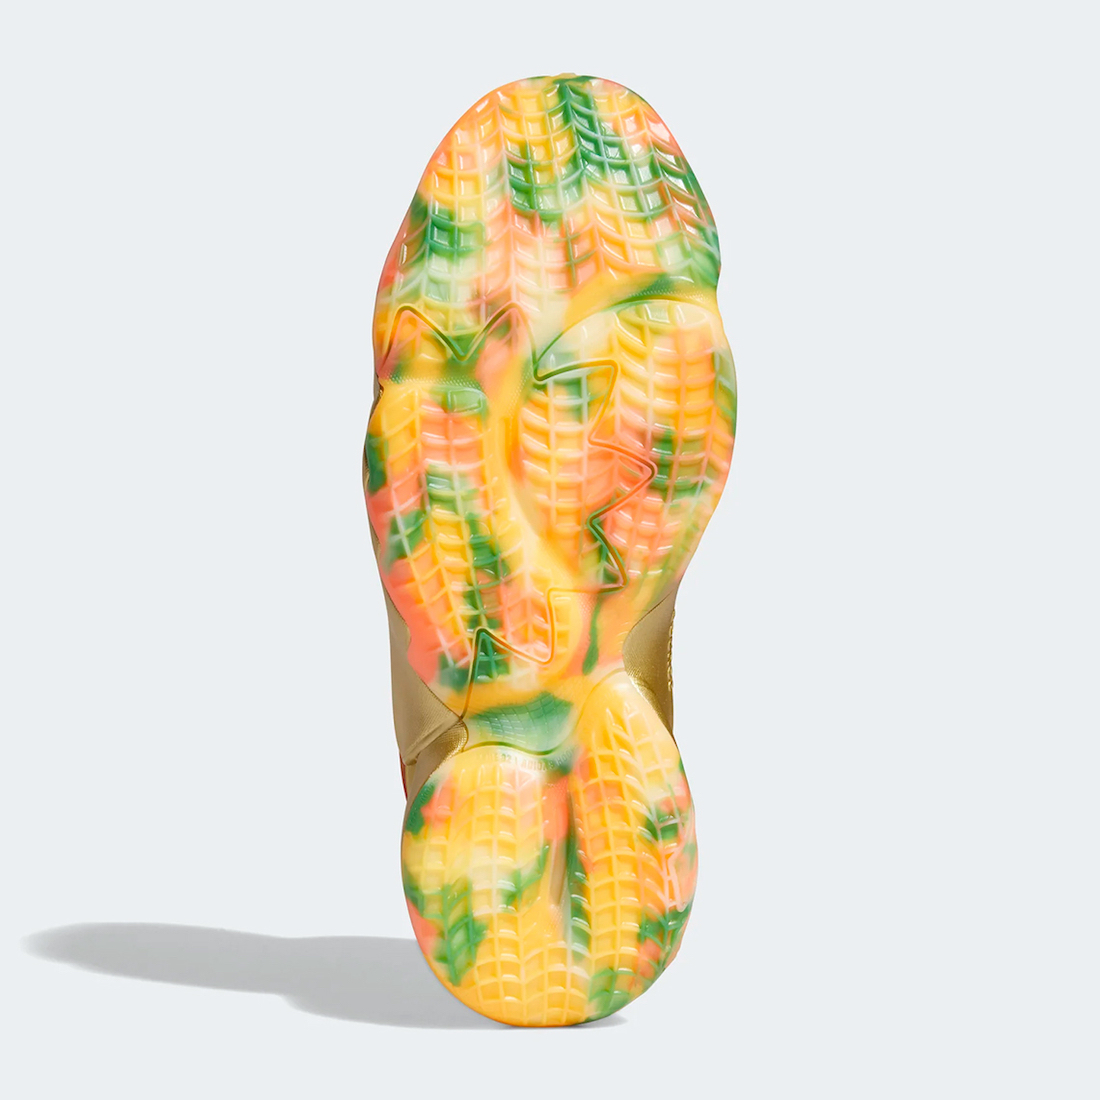 adidas DON Issue 2 Gummy Bears FW9050 Release Date